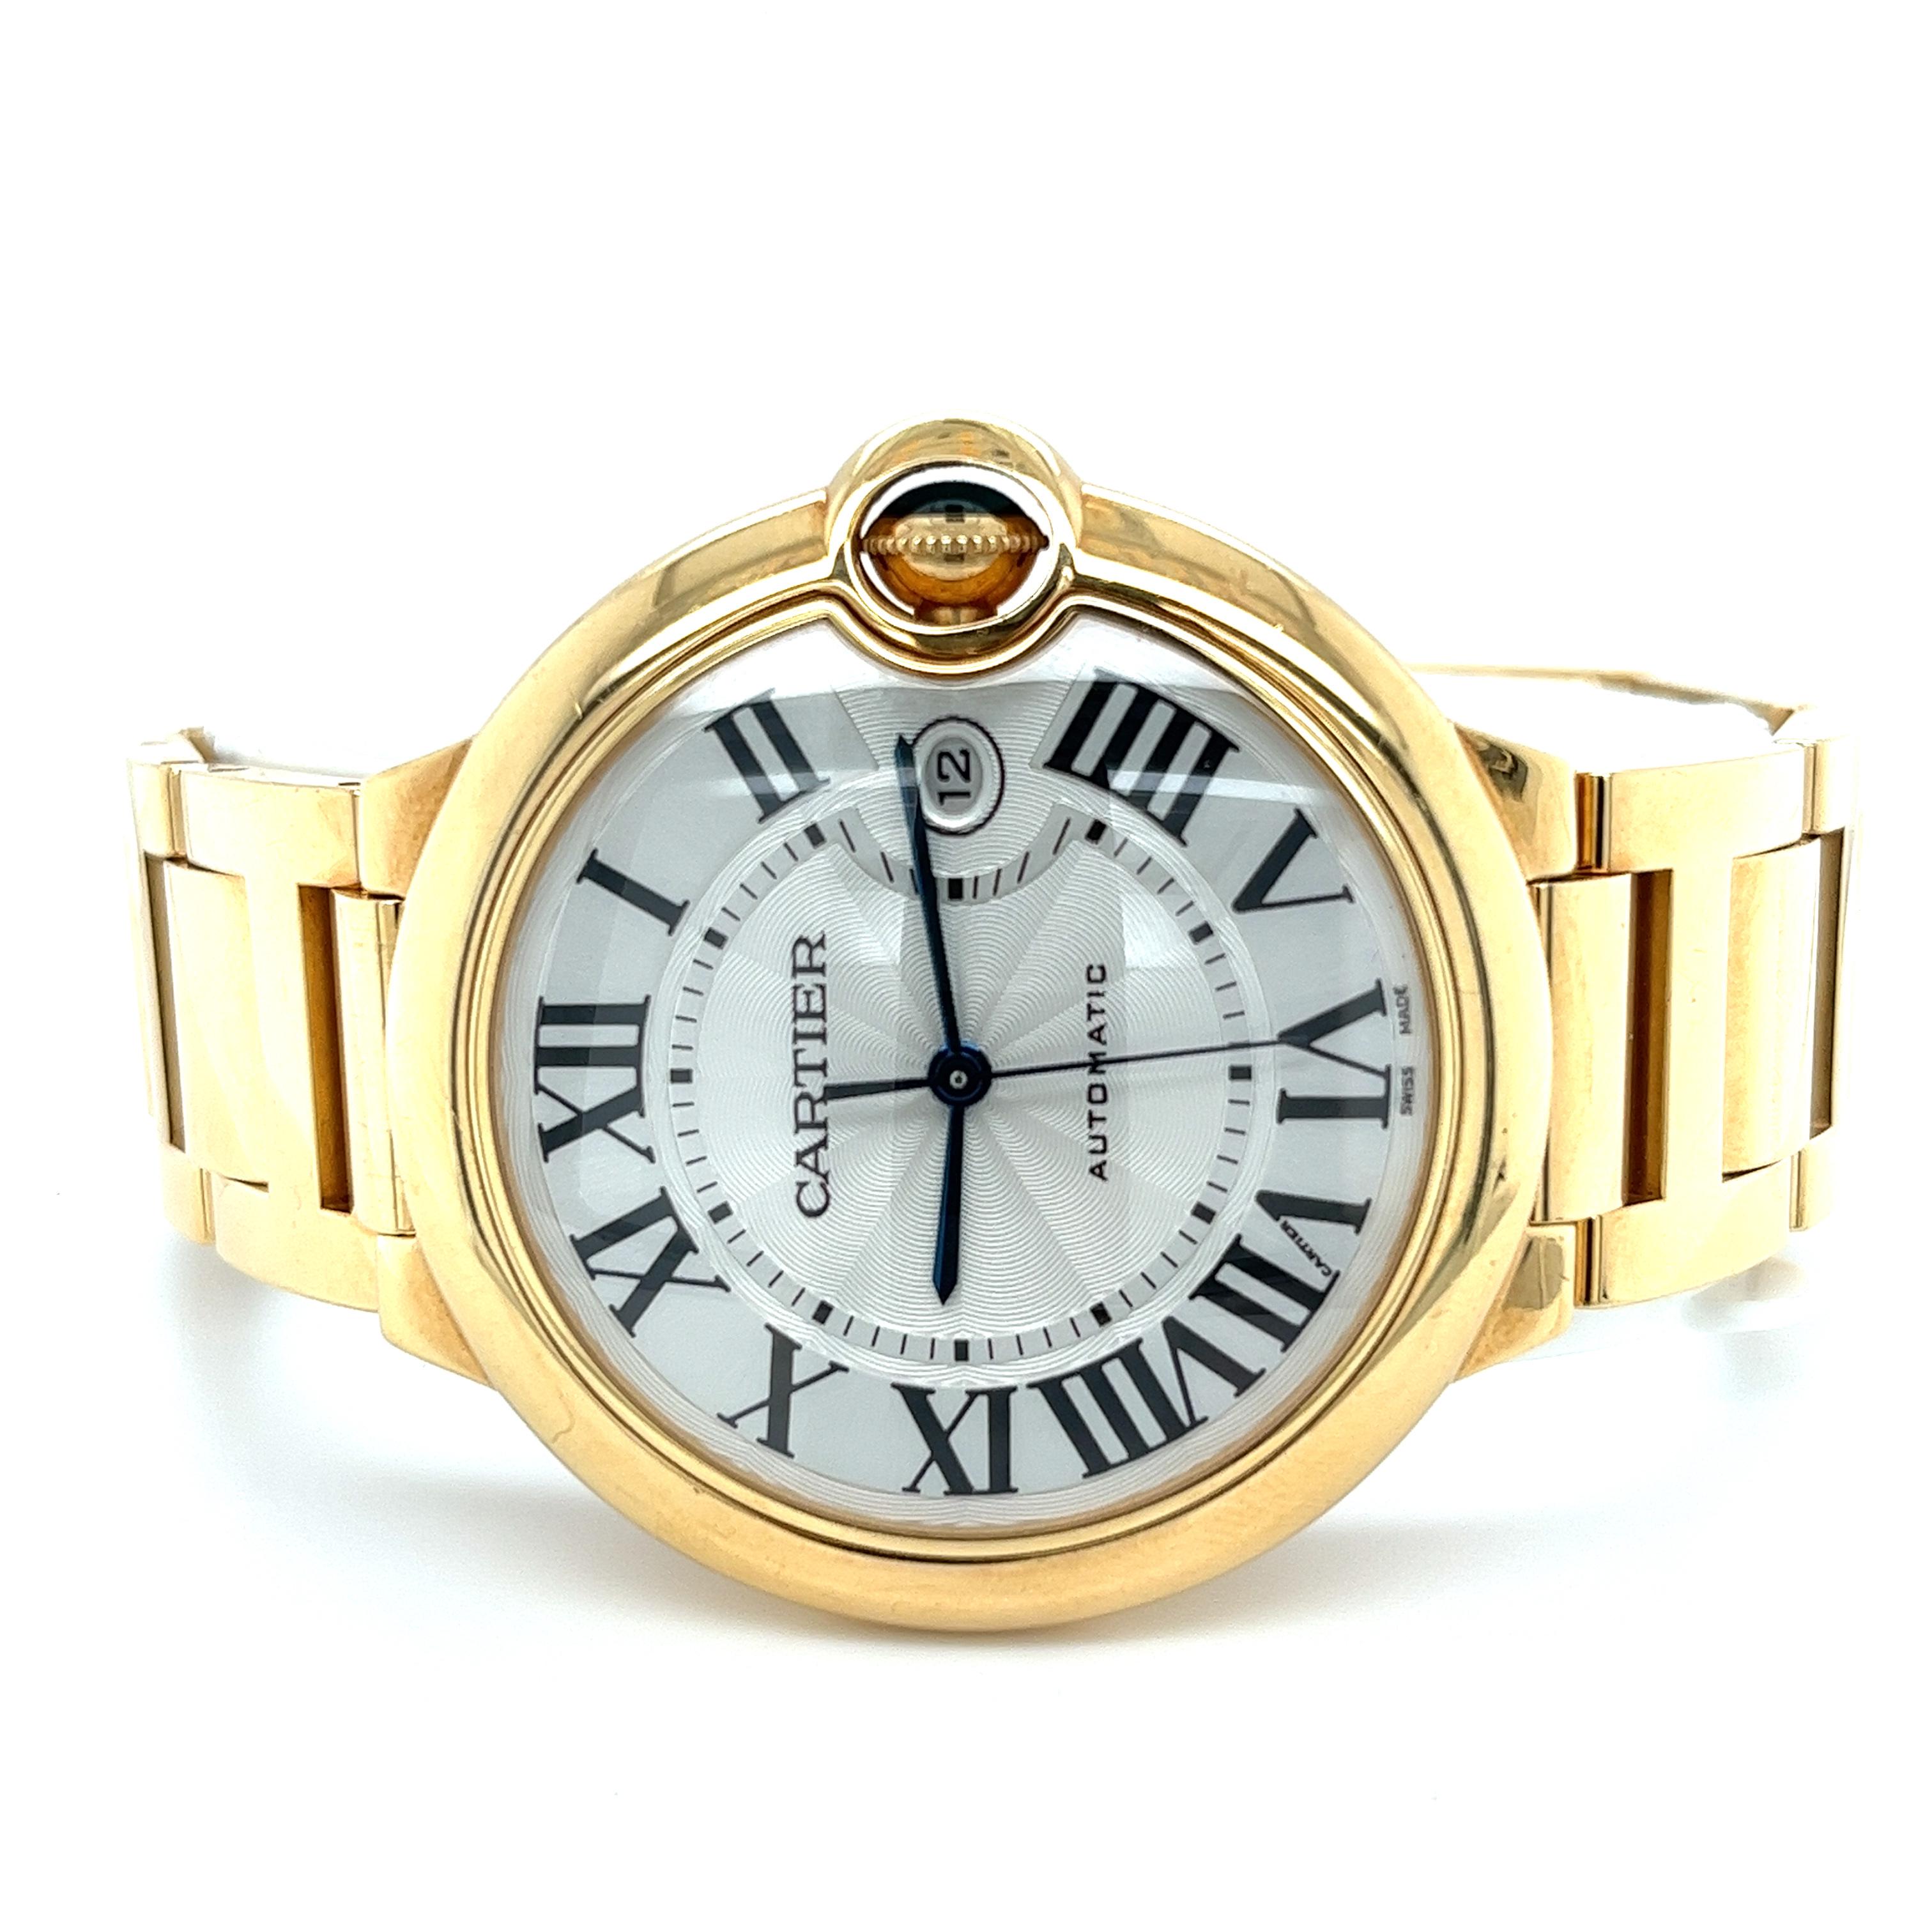 Cartier Ballon Bleu Jumbo Large Size Mens Watch in 18k Gold with Box/Papers en vente 2